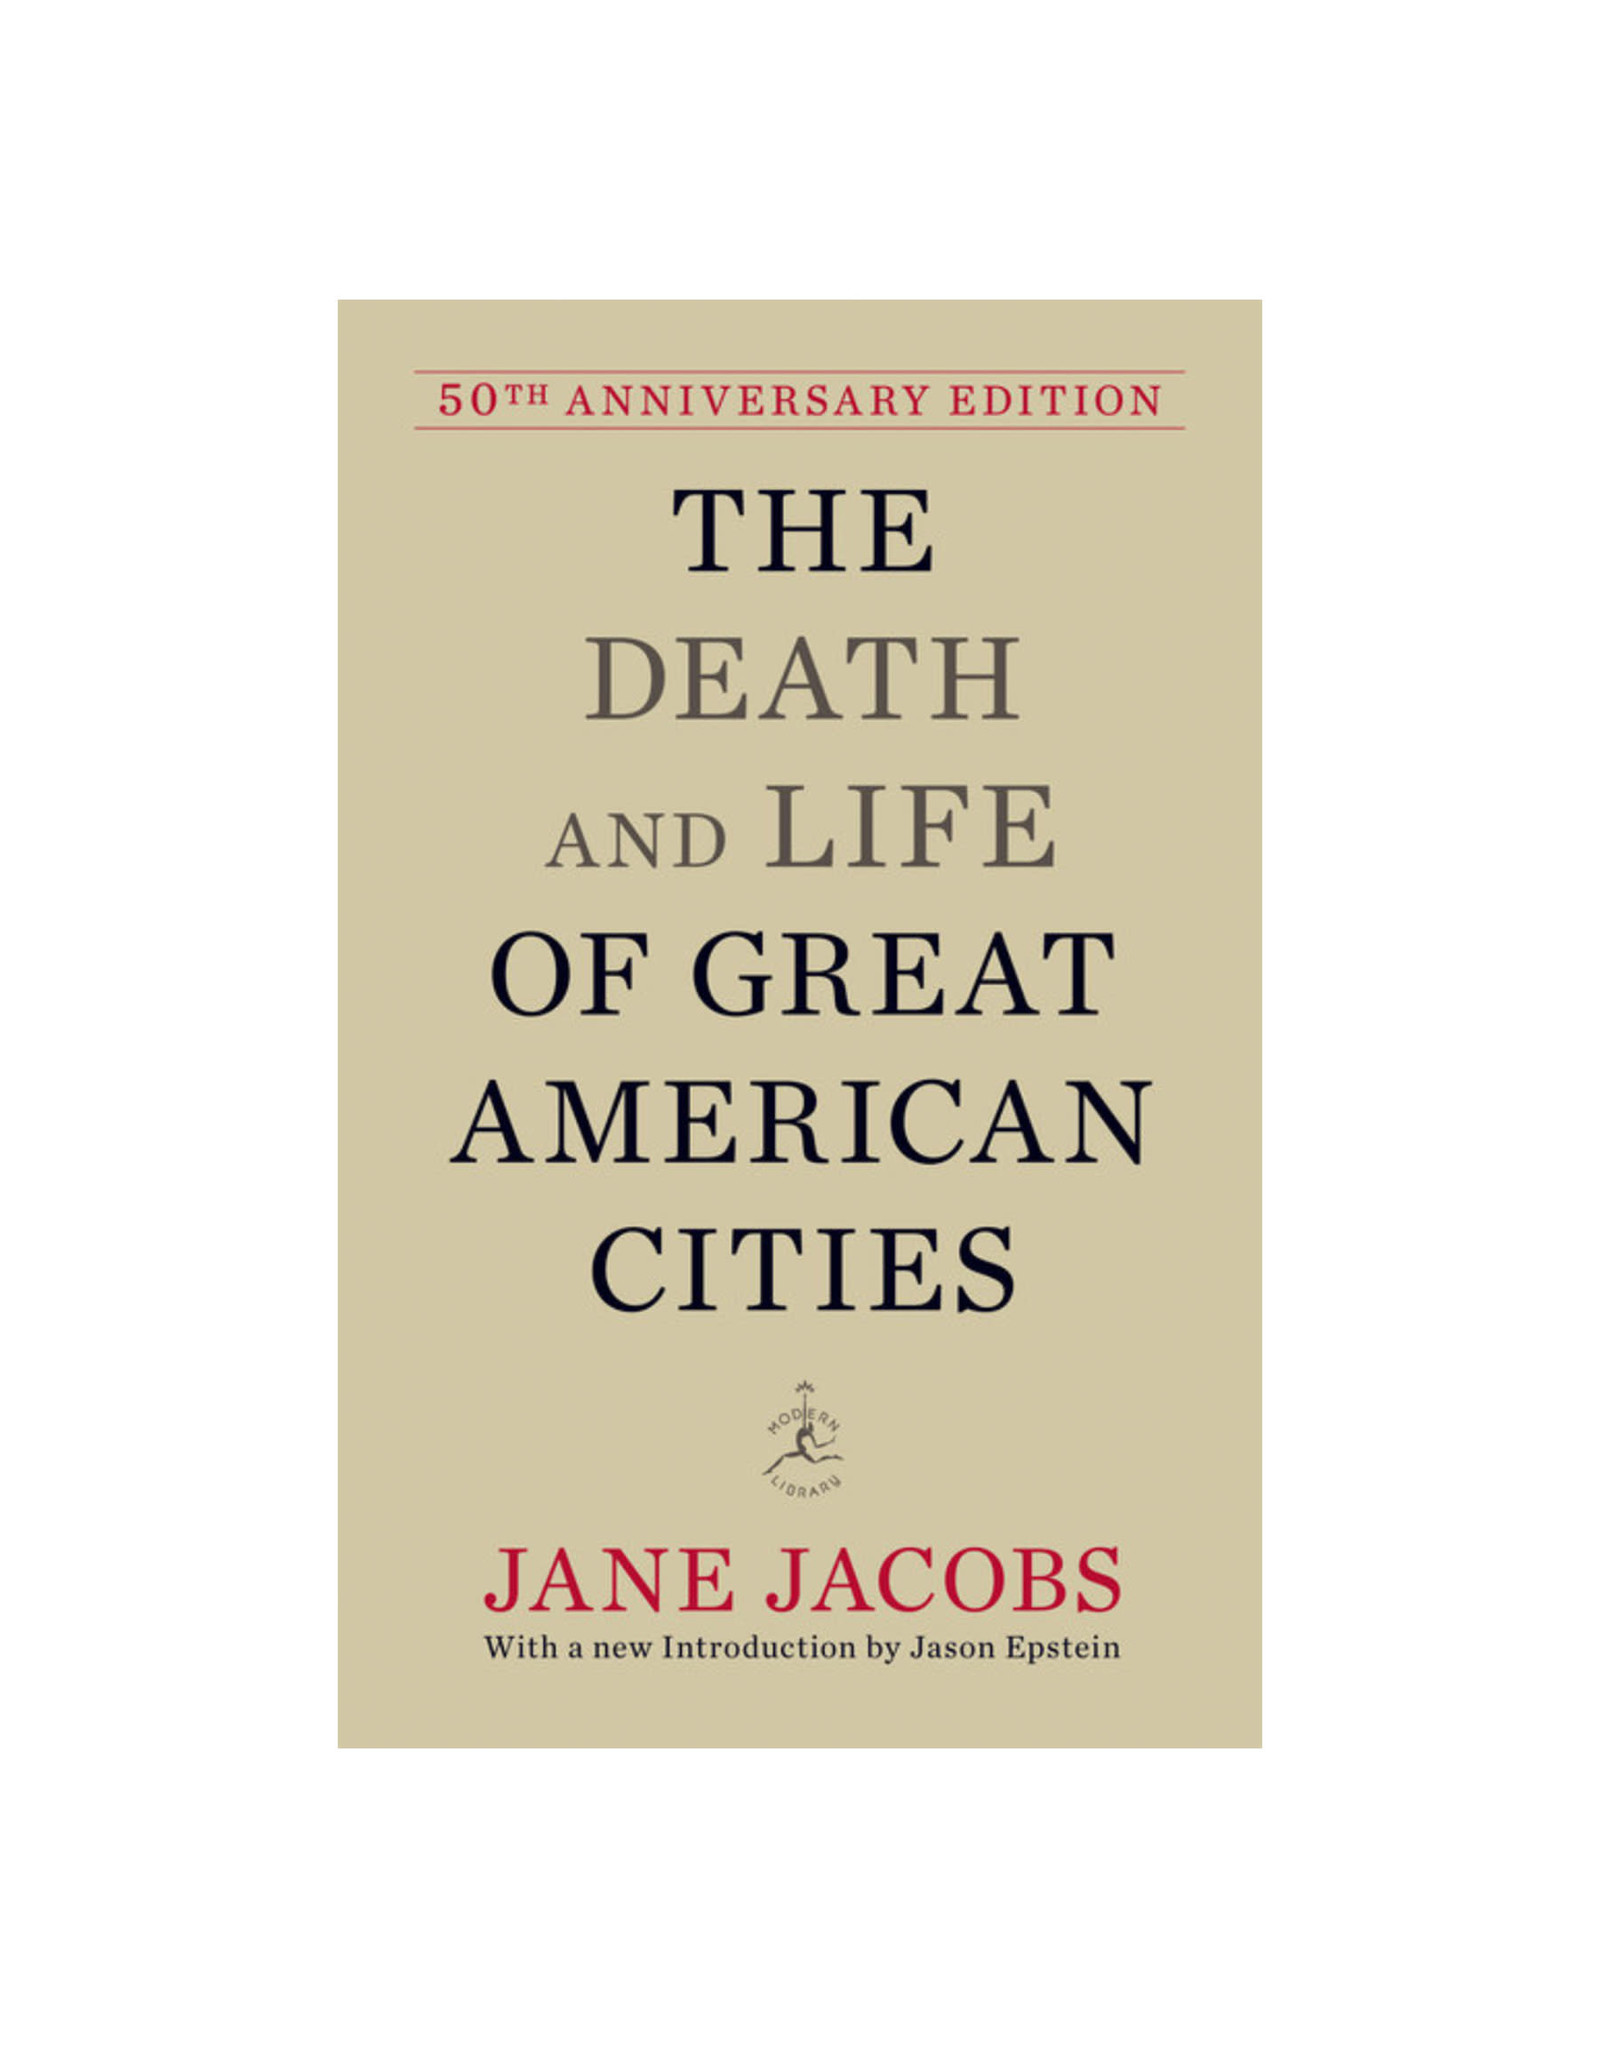 Jane Jacobs The Death and Life of Great American Cities, 50th Anniversary Edition